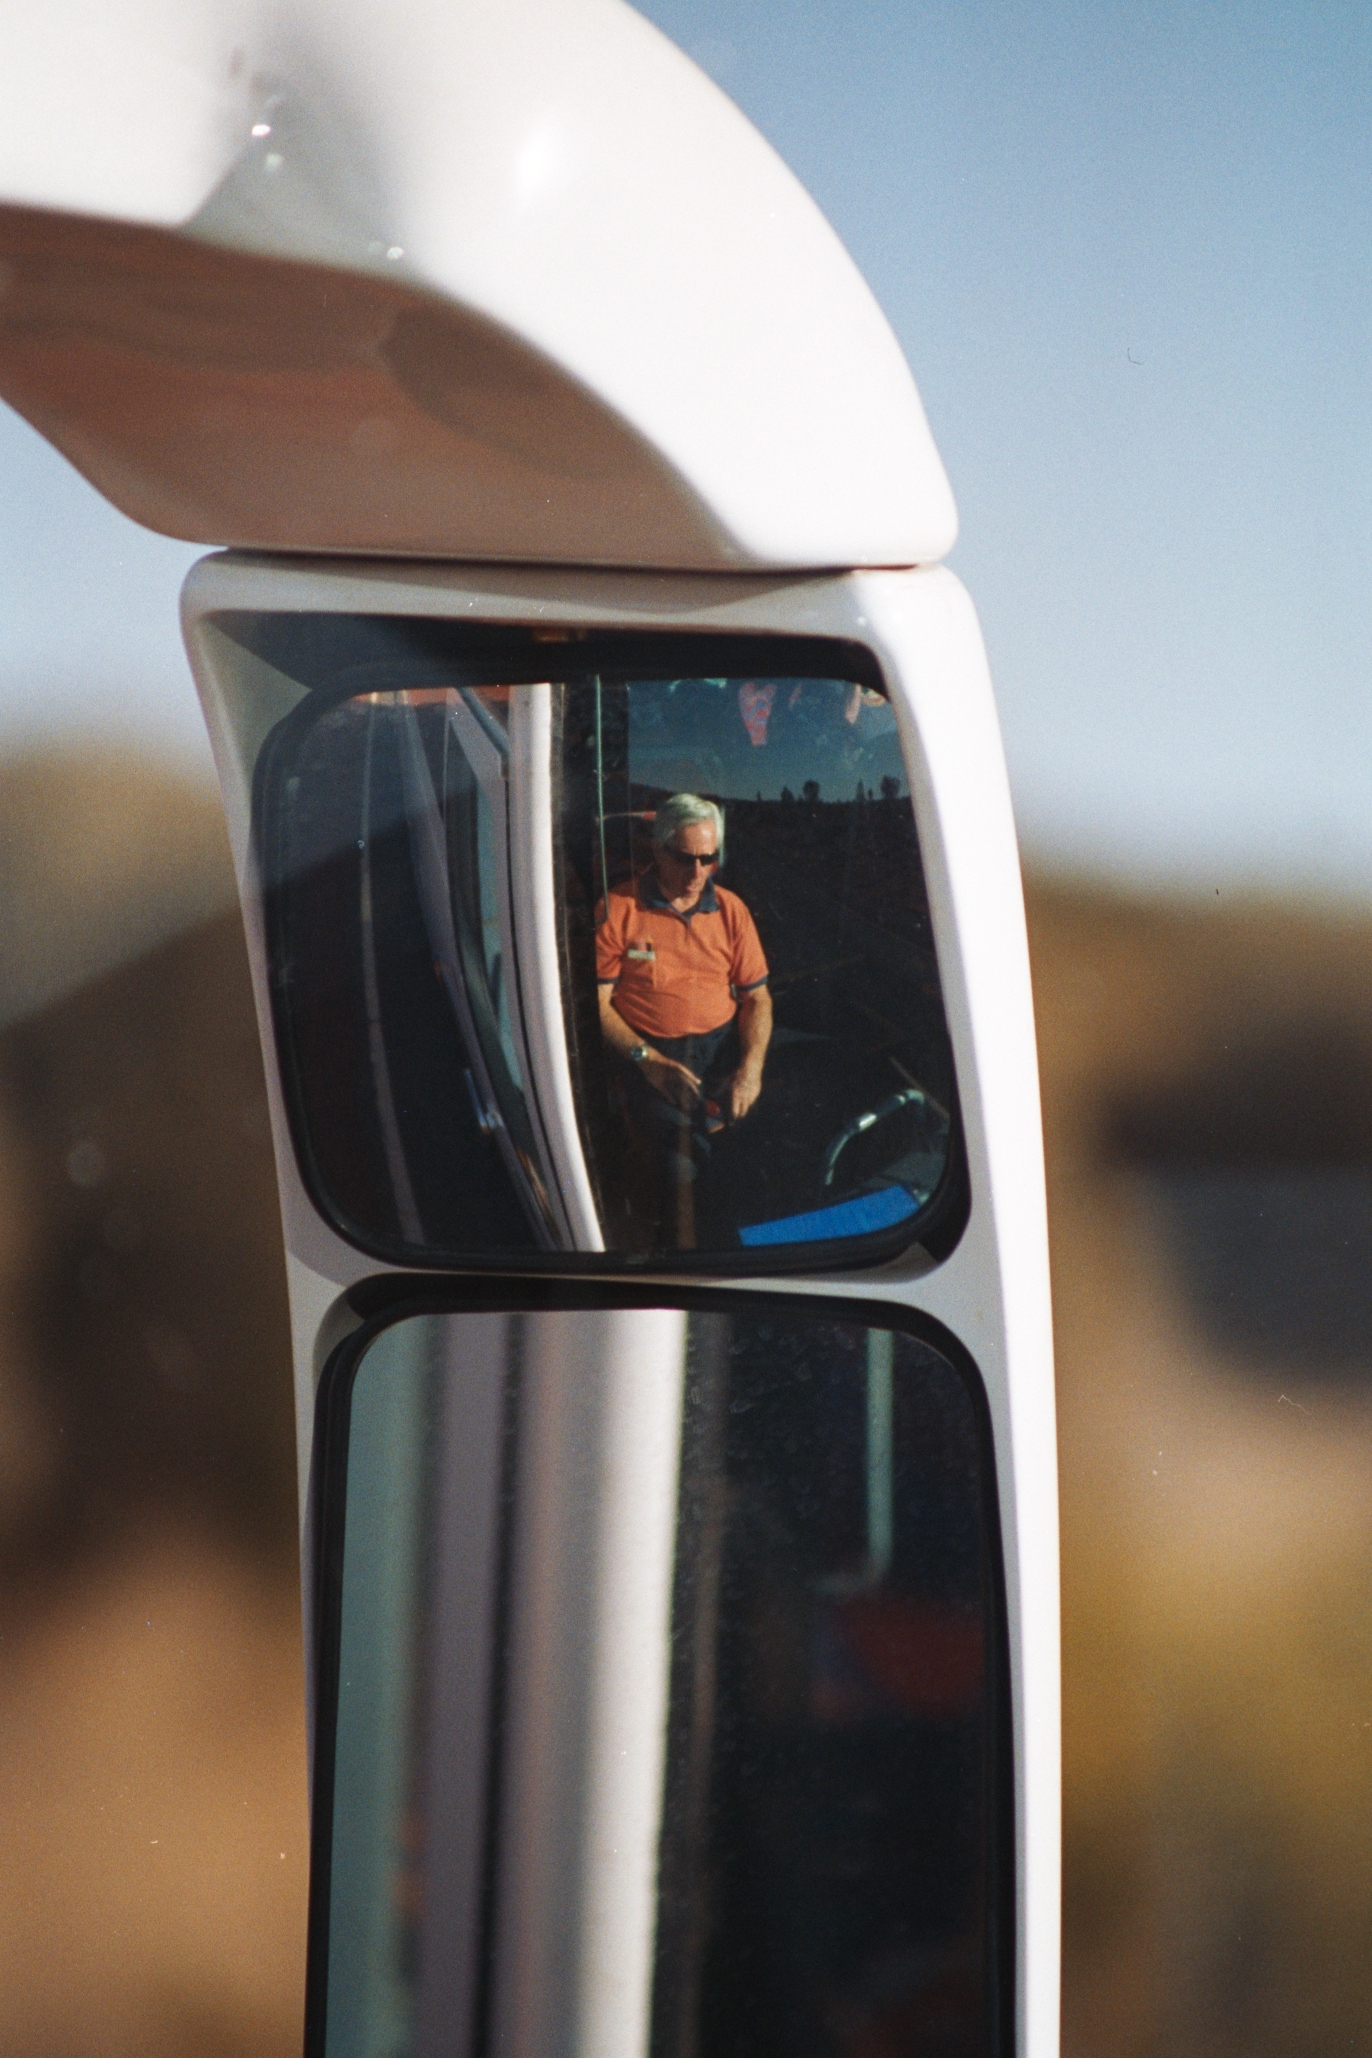 a side view mirror shows the reflection of a man on a bicycle